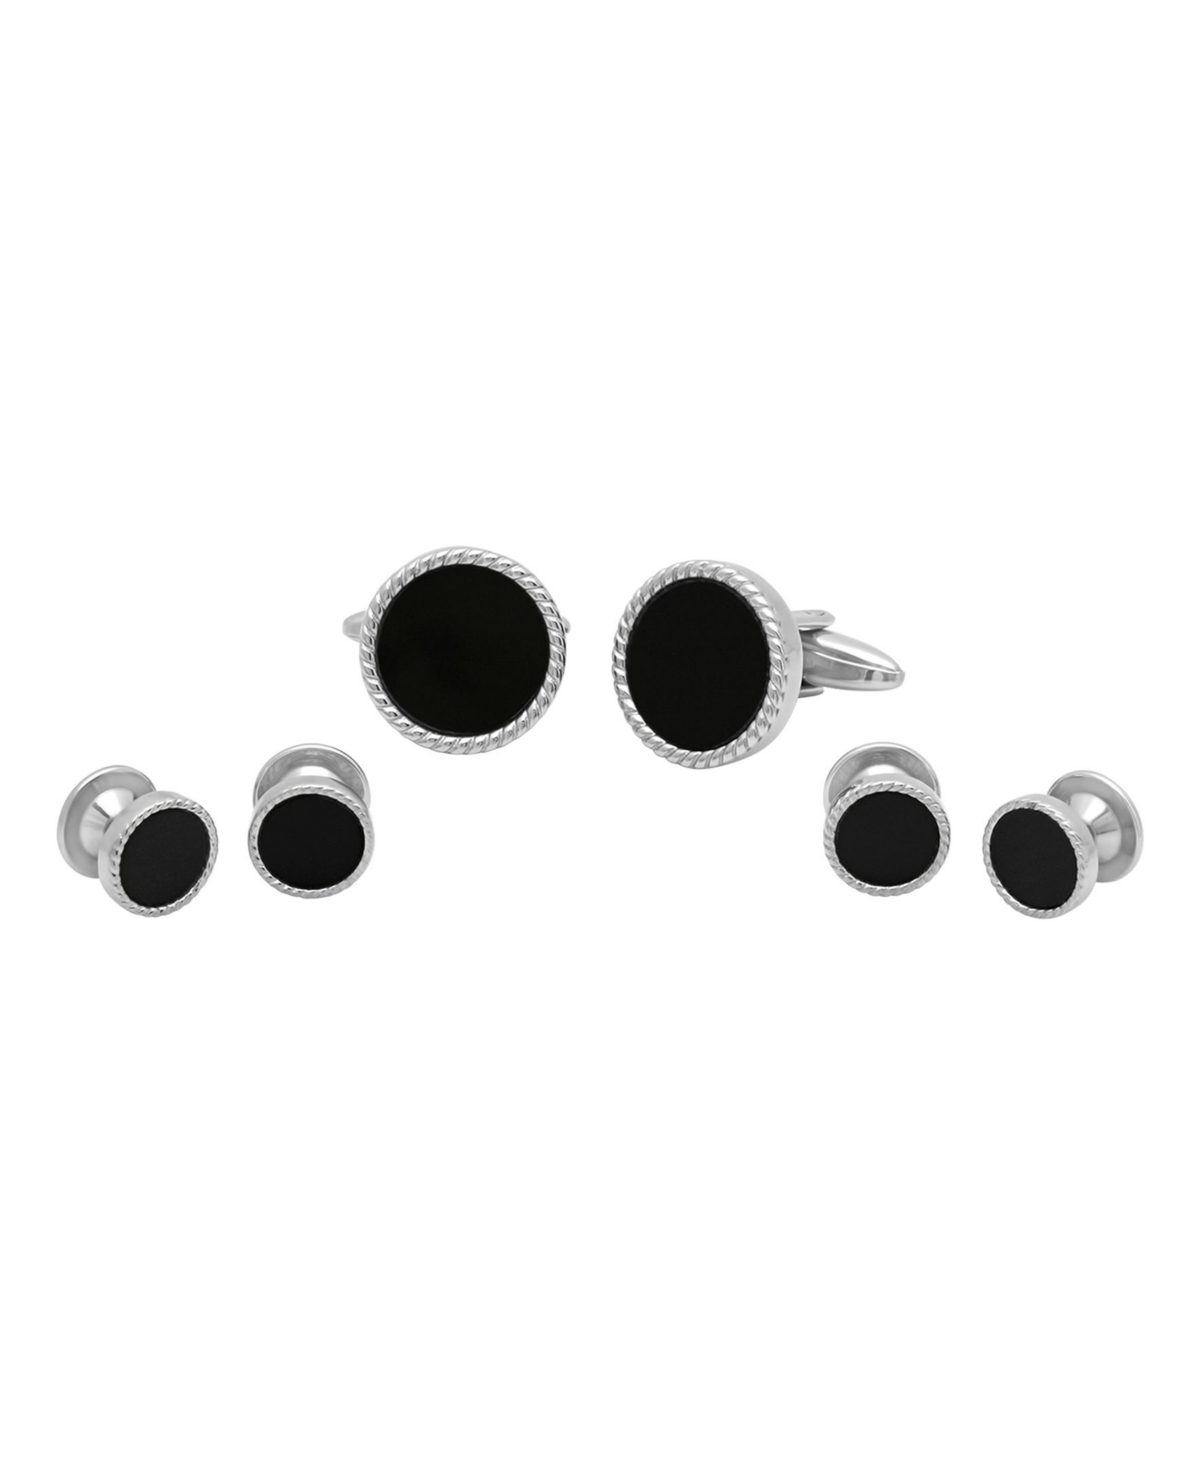 Men's Resin Tuxedo in Stainless Steel Stud and Cufflink Set - 3 Pieces - Black